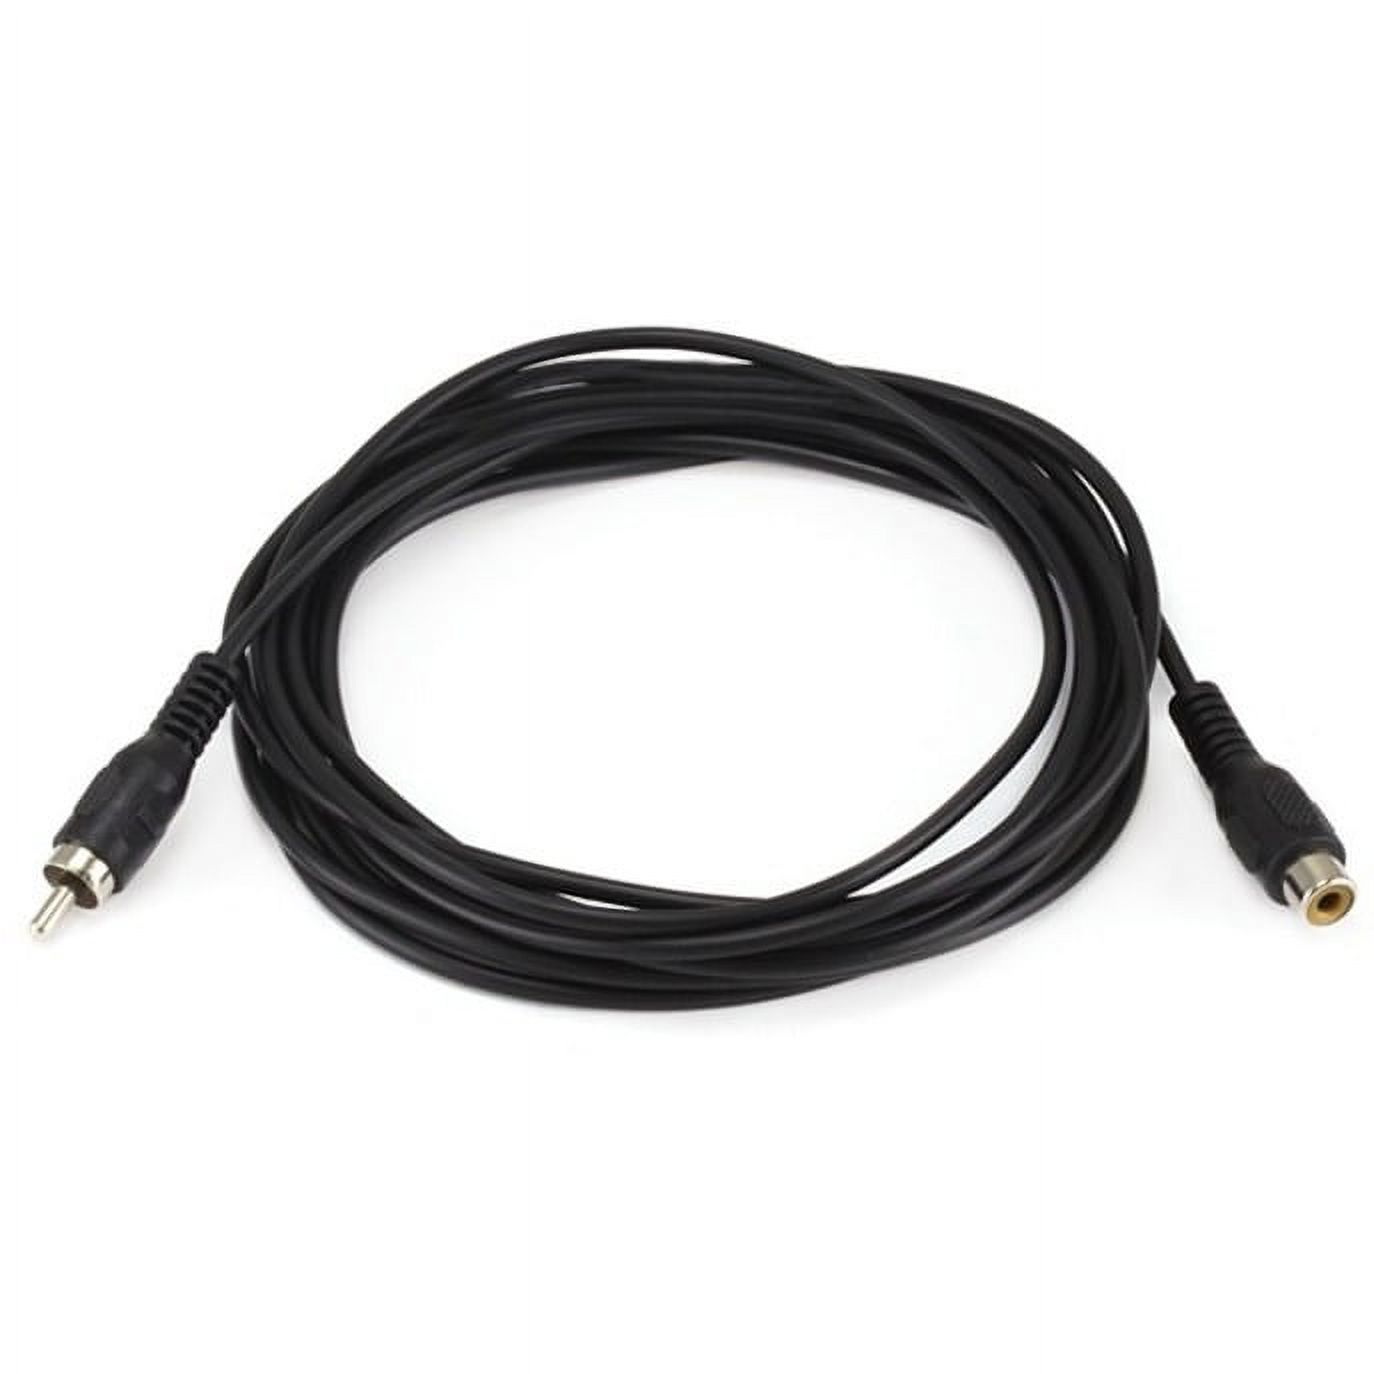 Monoprice Single-Channel Extension Cable - 12 Feet - Black | RCA Plug/Jack Male/Female, ideal for extending low-frequency RCA connections - image 1 of 2